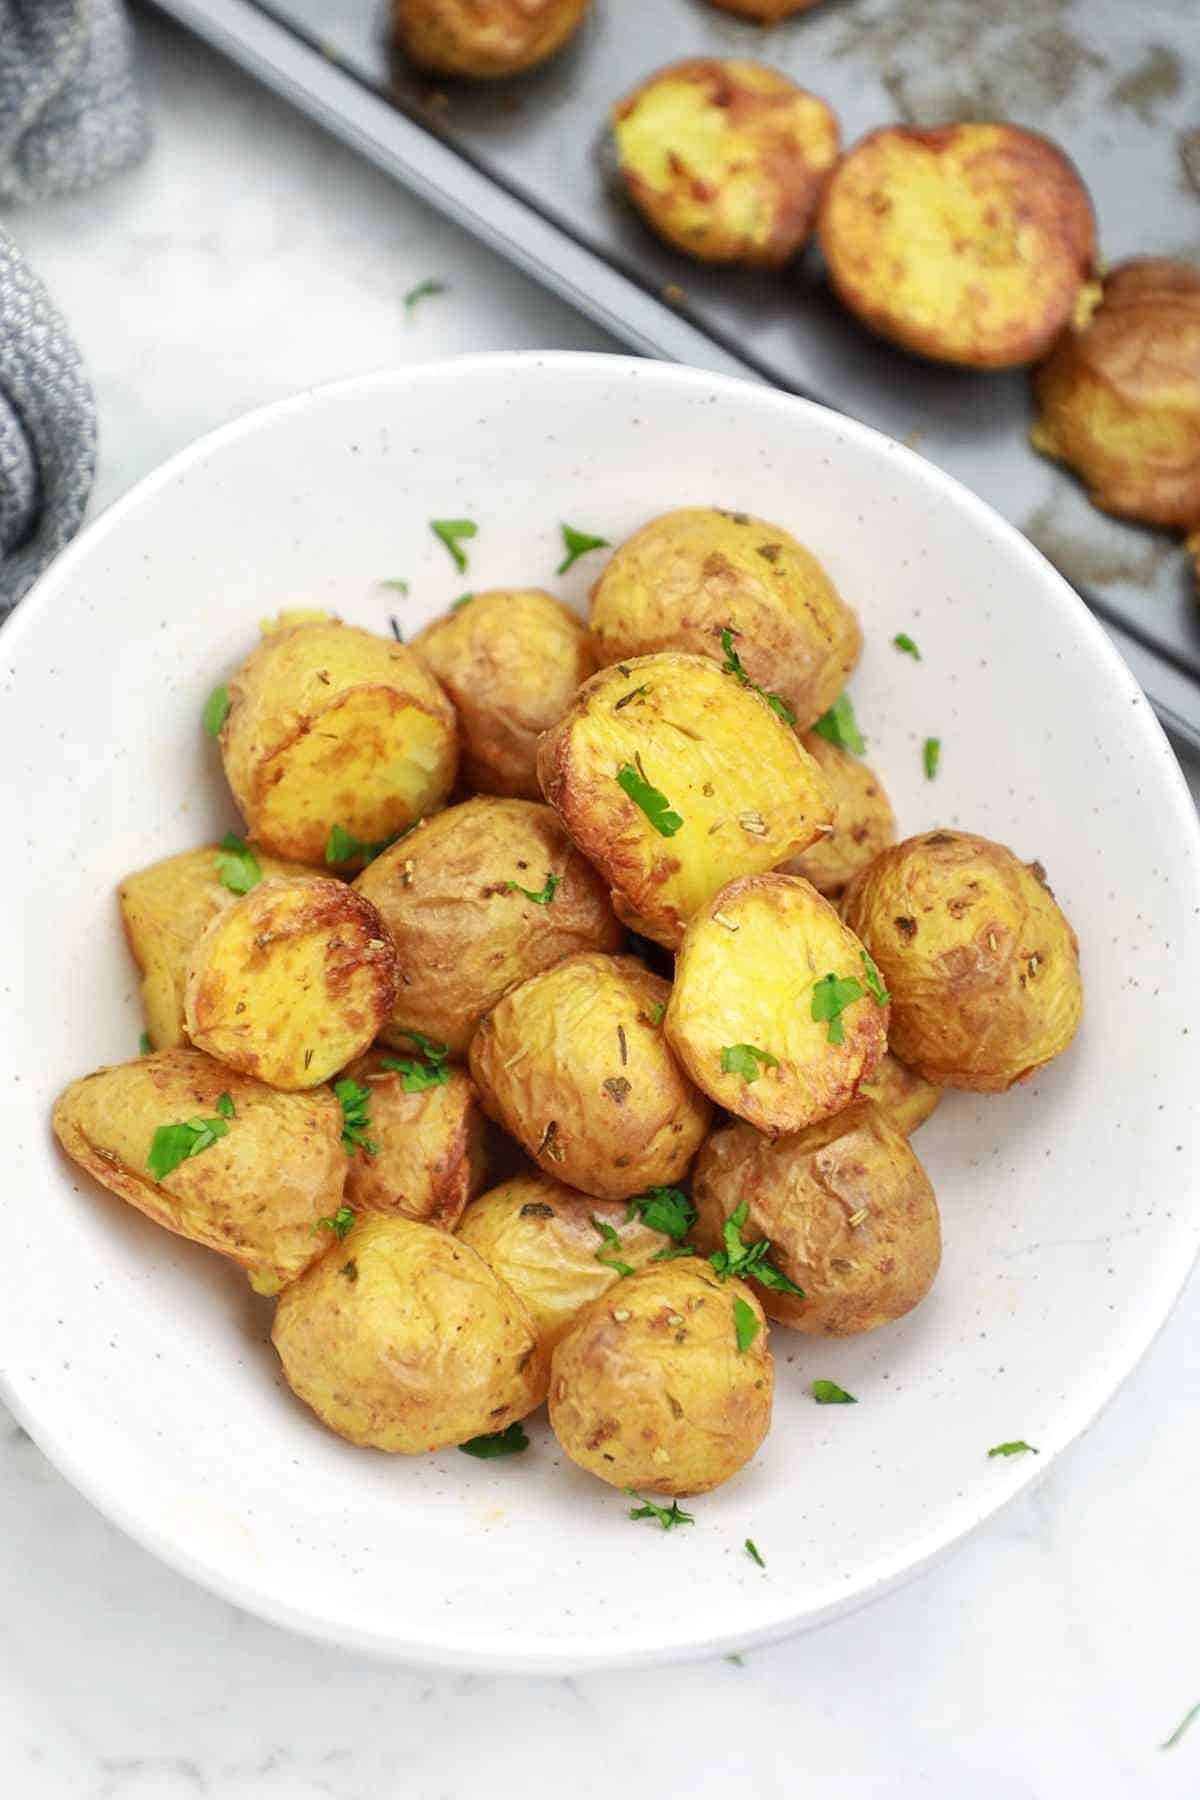 roasted baby potatoes served and garnished with parsley.